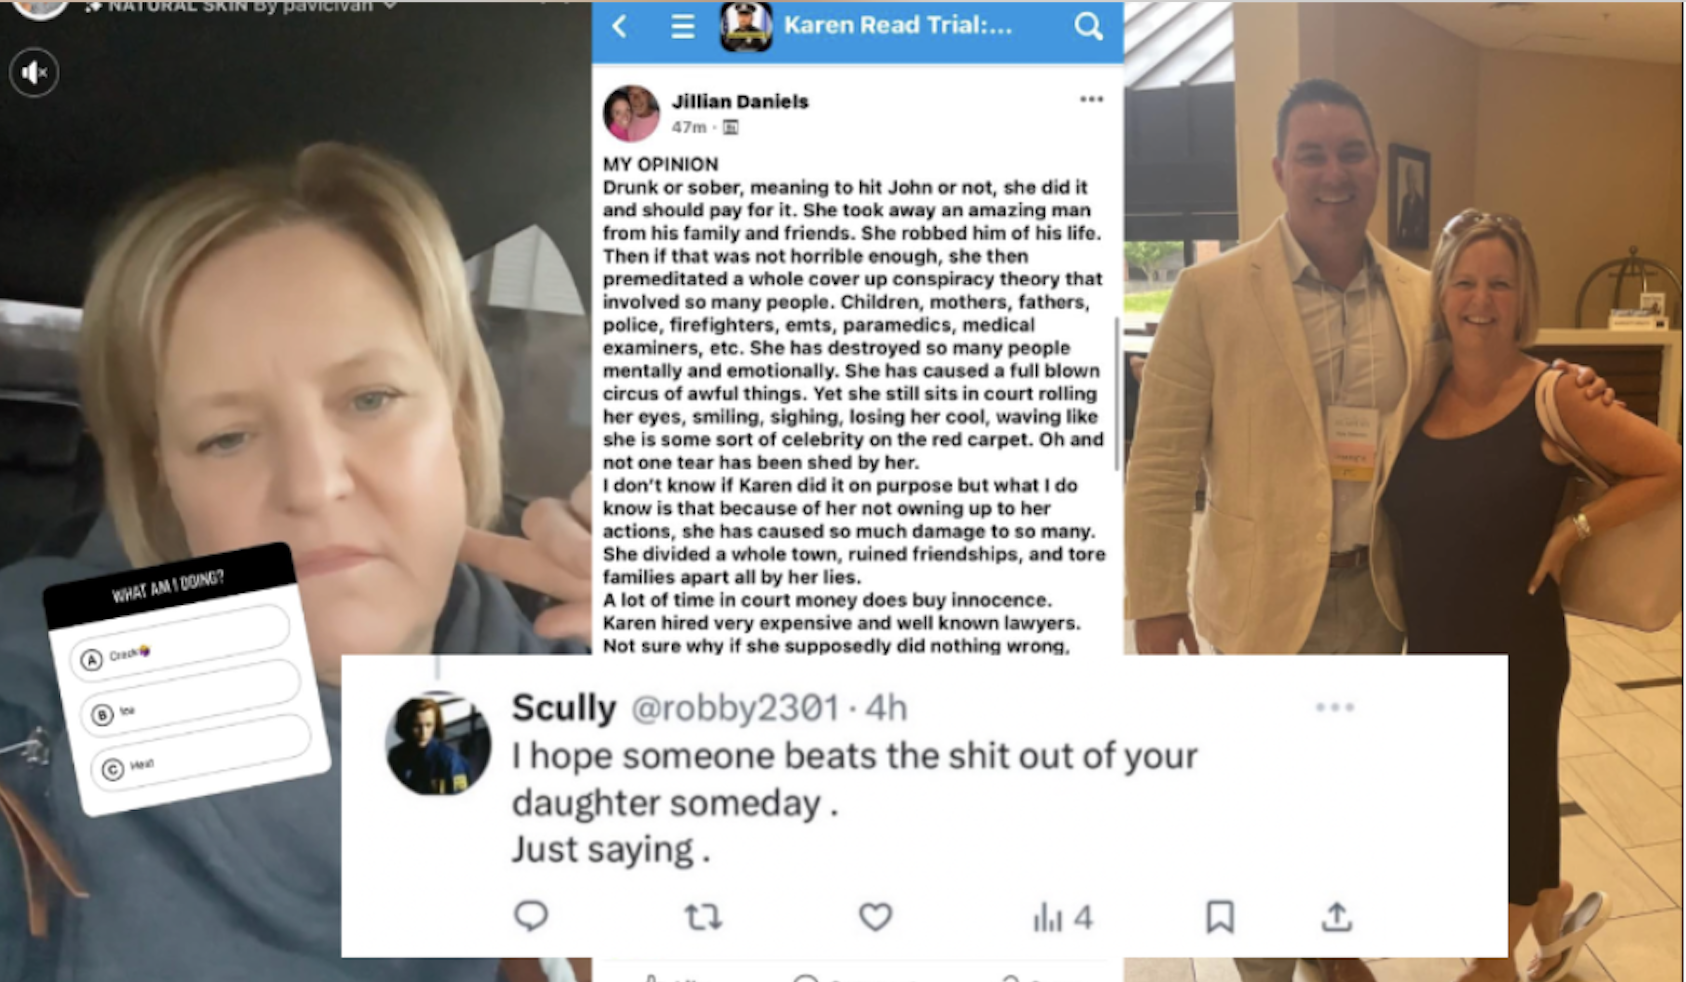 Canton Coverup Part 353: Middleboro Healthcare Worker Robin Brides Self-Doxxes Her Anonymous Twitter Account Threatening Children, Joins McAlbert Mafia After Previously Supporting Karen Read And Turtleboy - TB Daily News